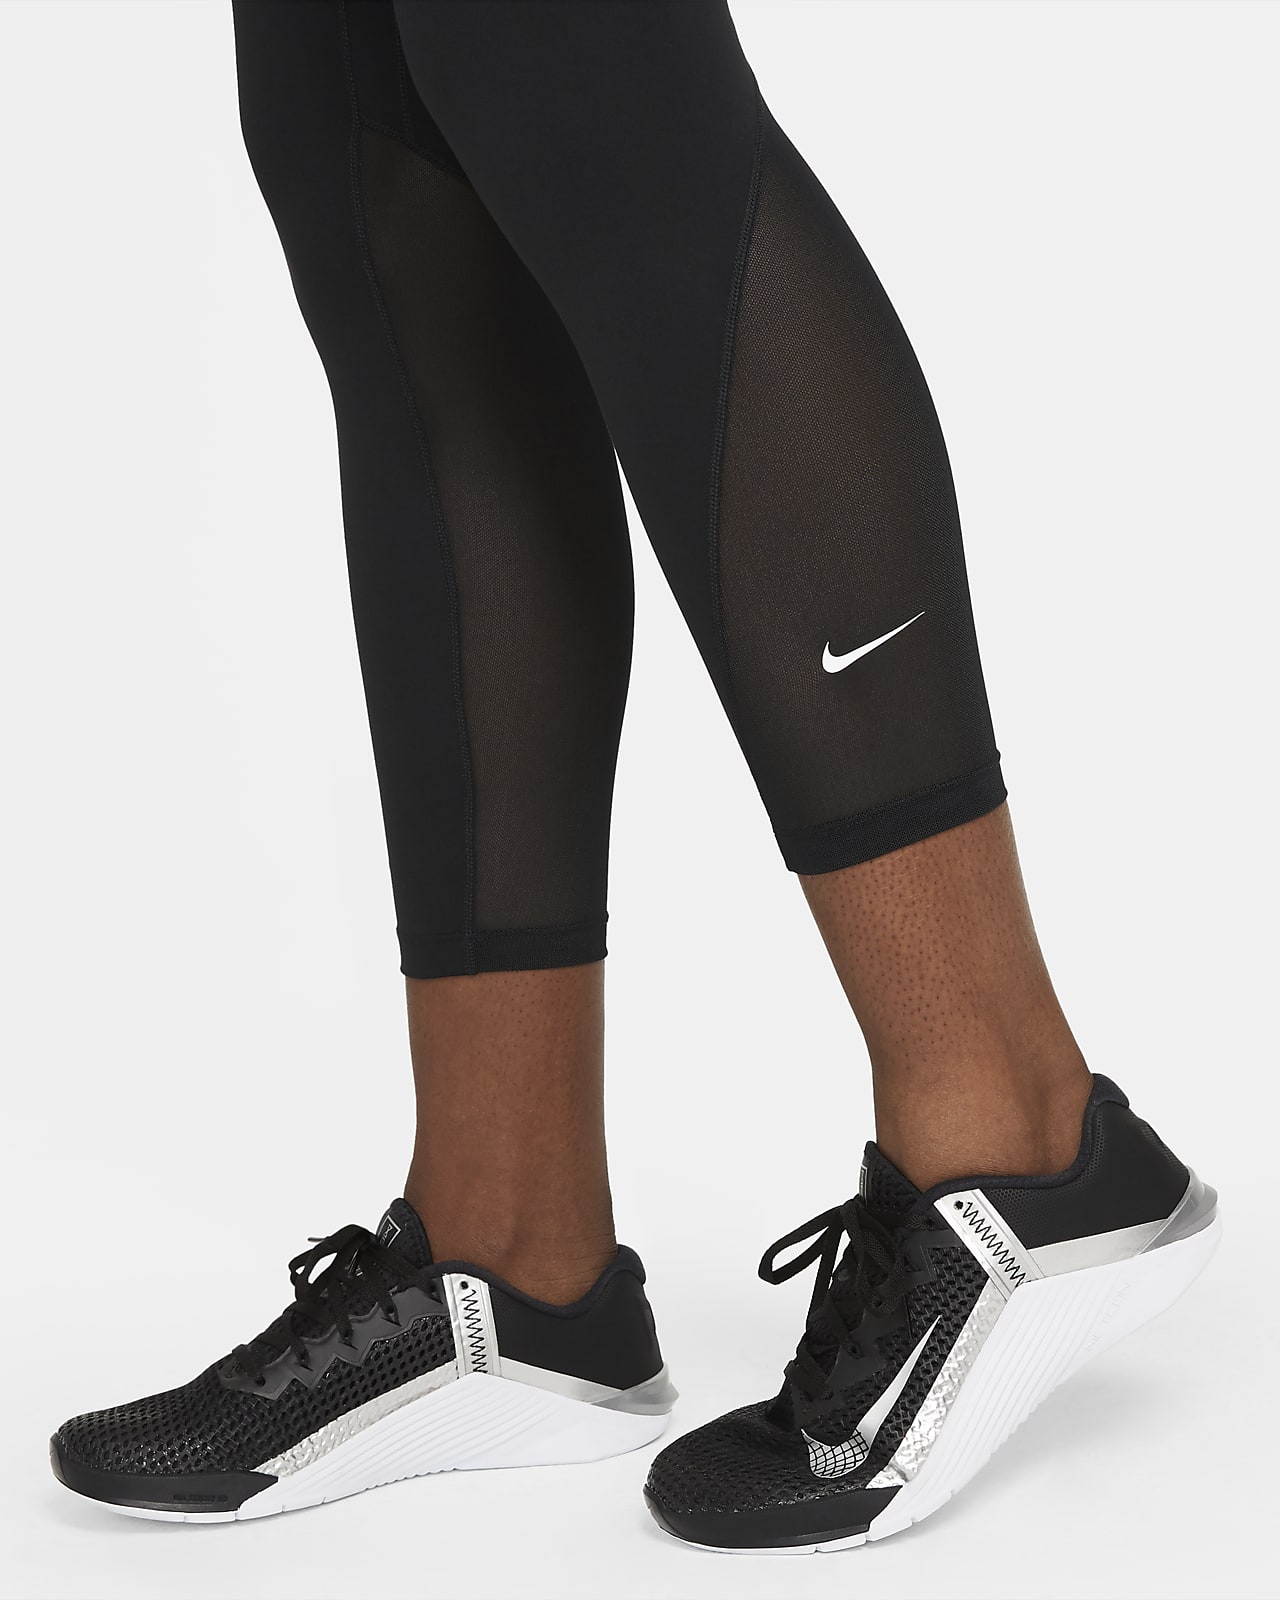 NIKE Women's Tight Fit Mid Rise 7/8 Length Leggings Size SMALL